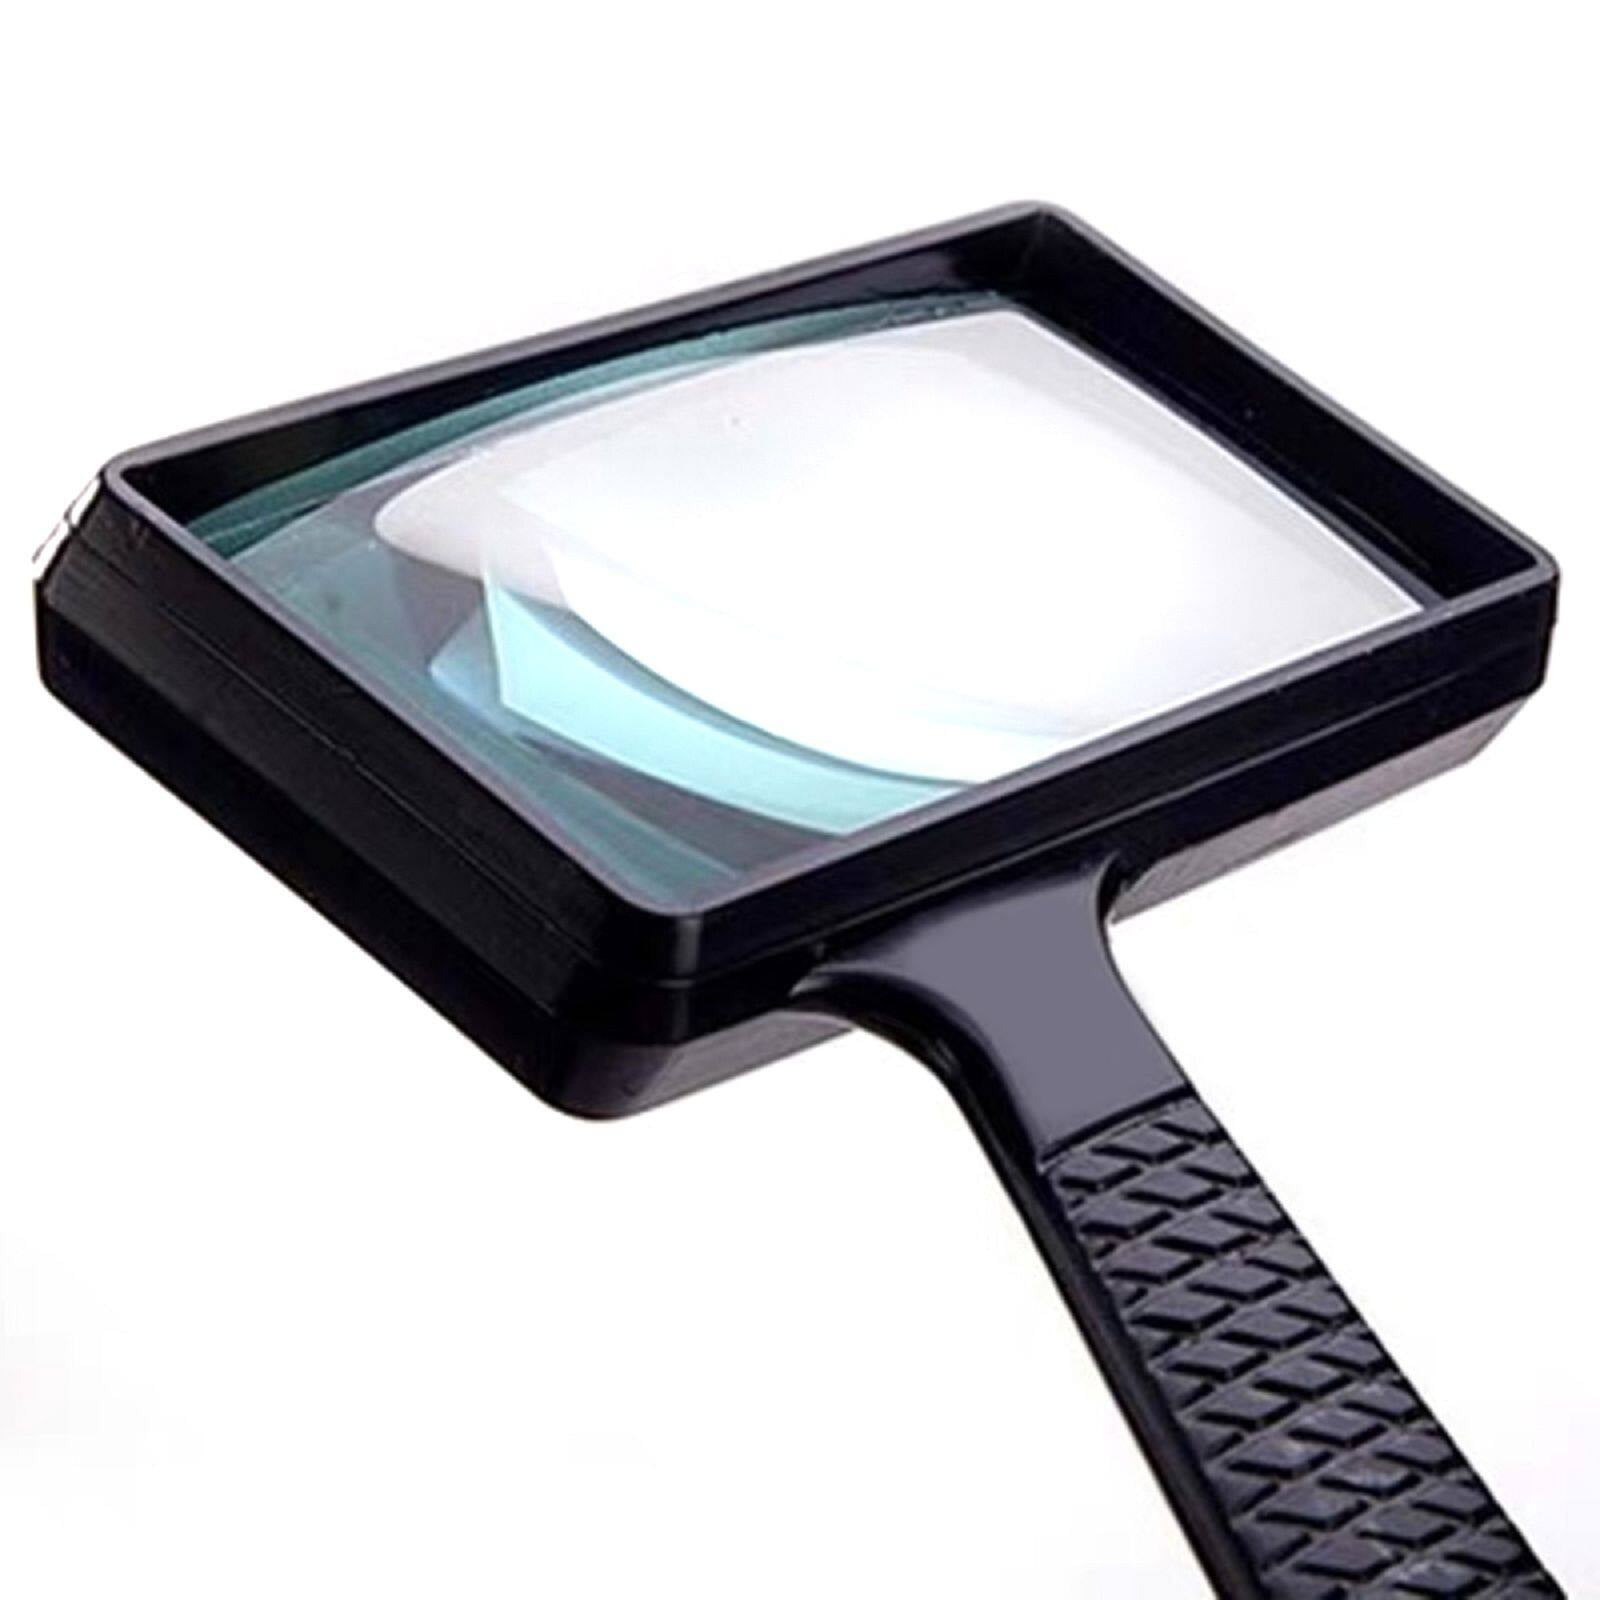 TECHSHARE Magnifying Glass with Light, Lighted Magnifying Glass, 5X  Handheld Pocket Magnifier Small Illuminated Folding Hand Held Lighted  Magnifier